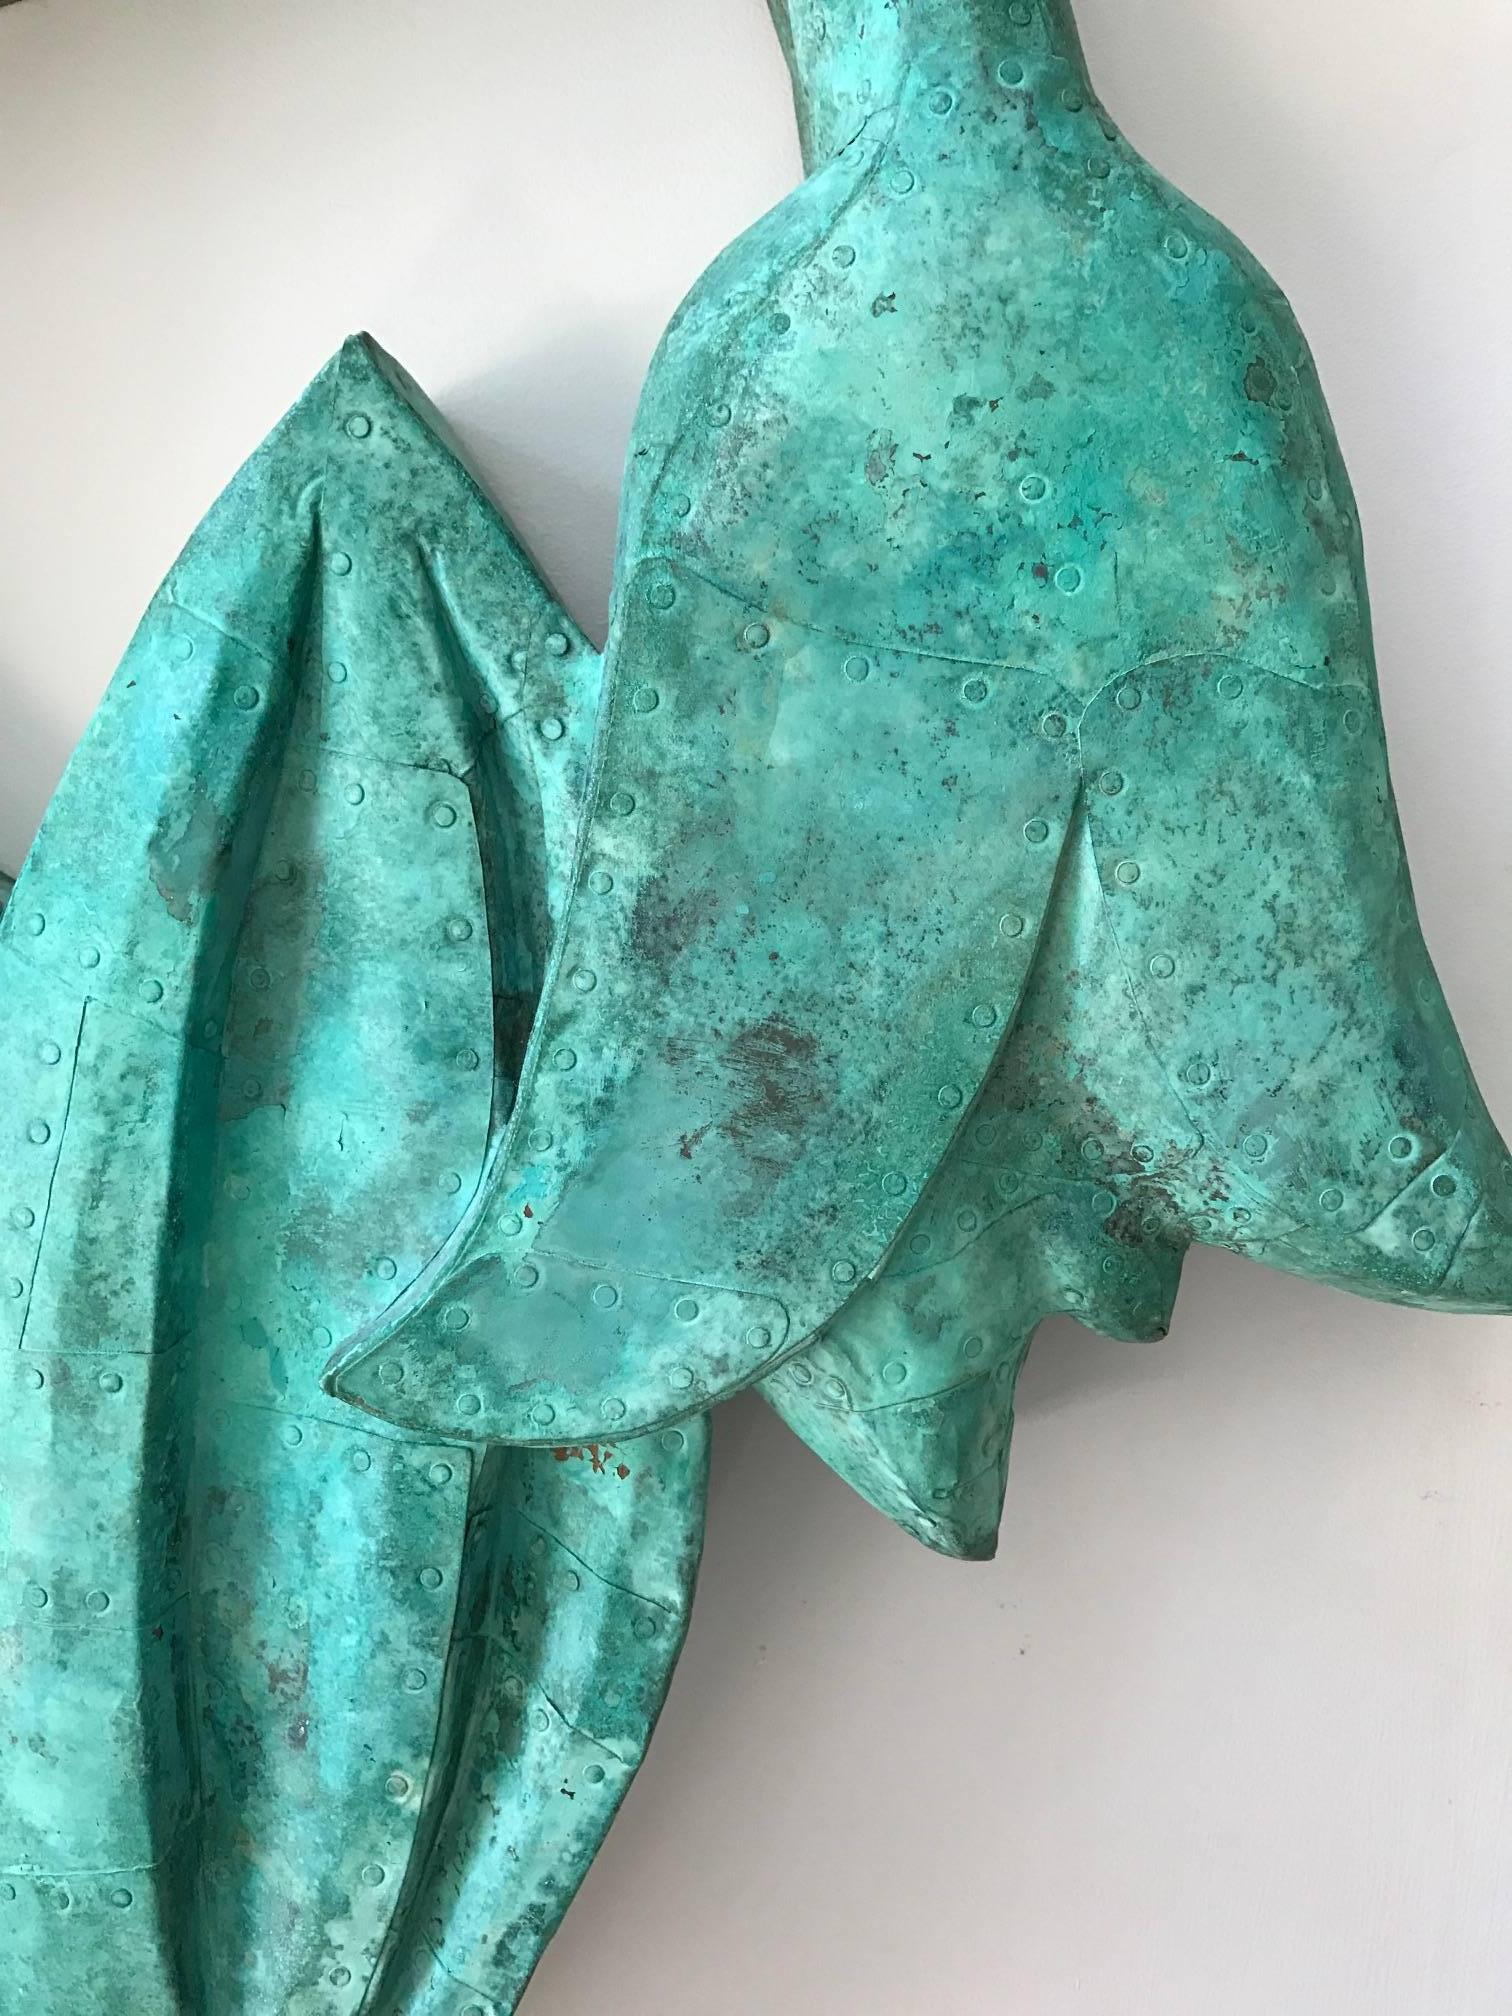 Dawn Southworth, Forget-Me-Nots, 38" x 32" x 4", patinated copper over wood

"Forget Me Nots" is a floral wall sculpture covered in bright hues of blue and green patinated copper. This wall sculpture is suitable for indoor